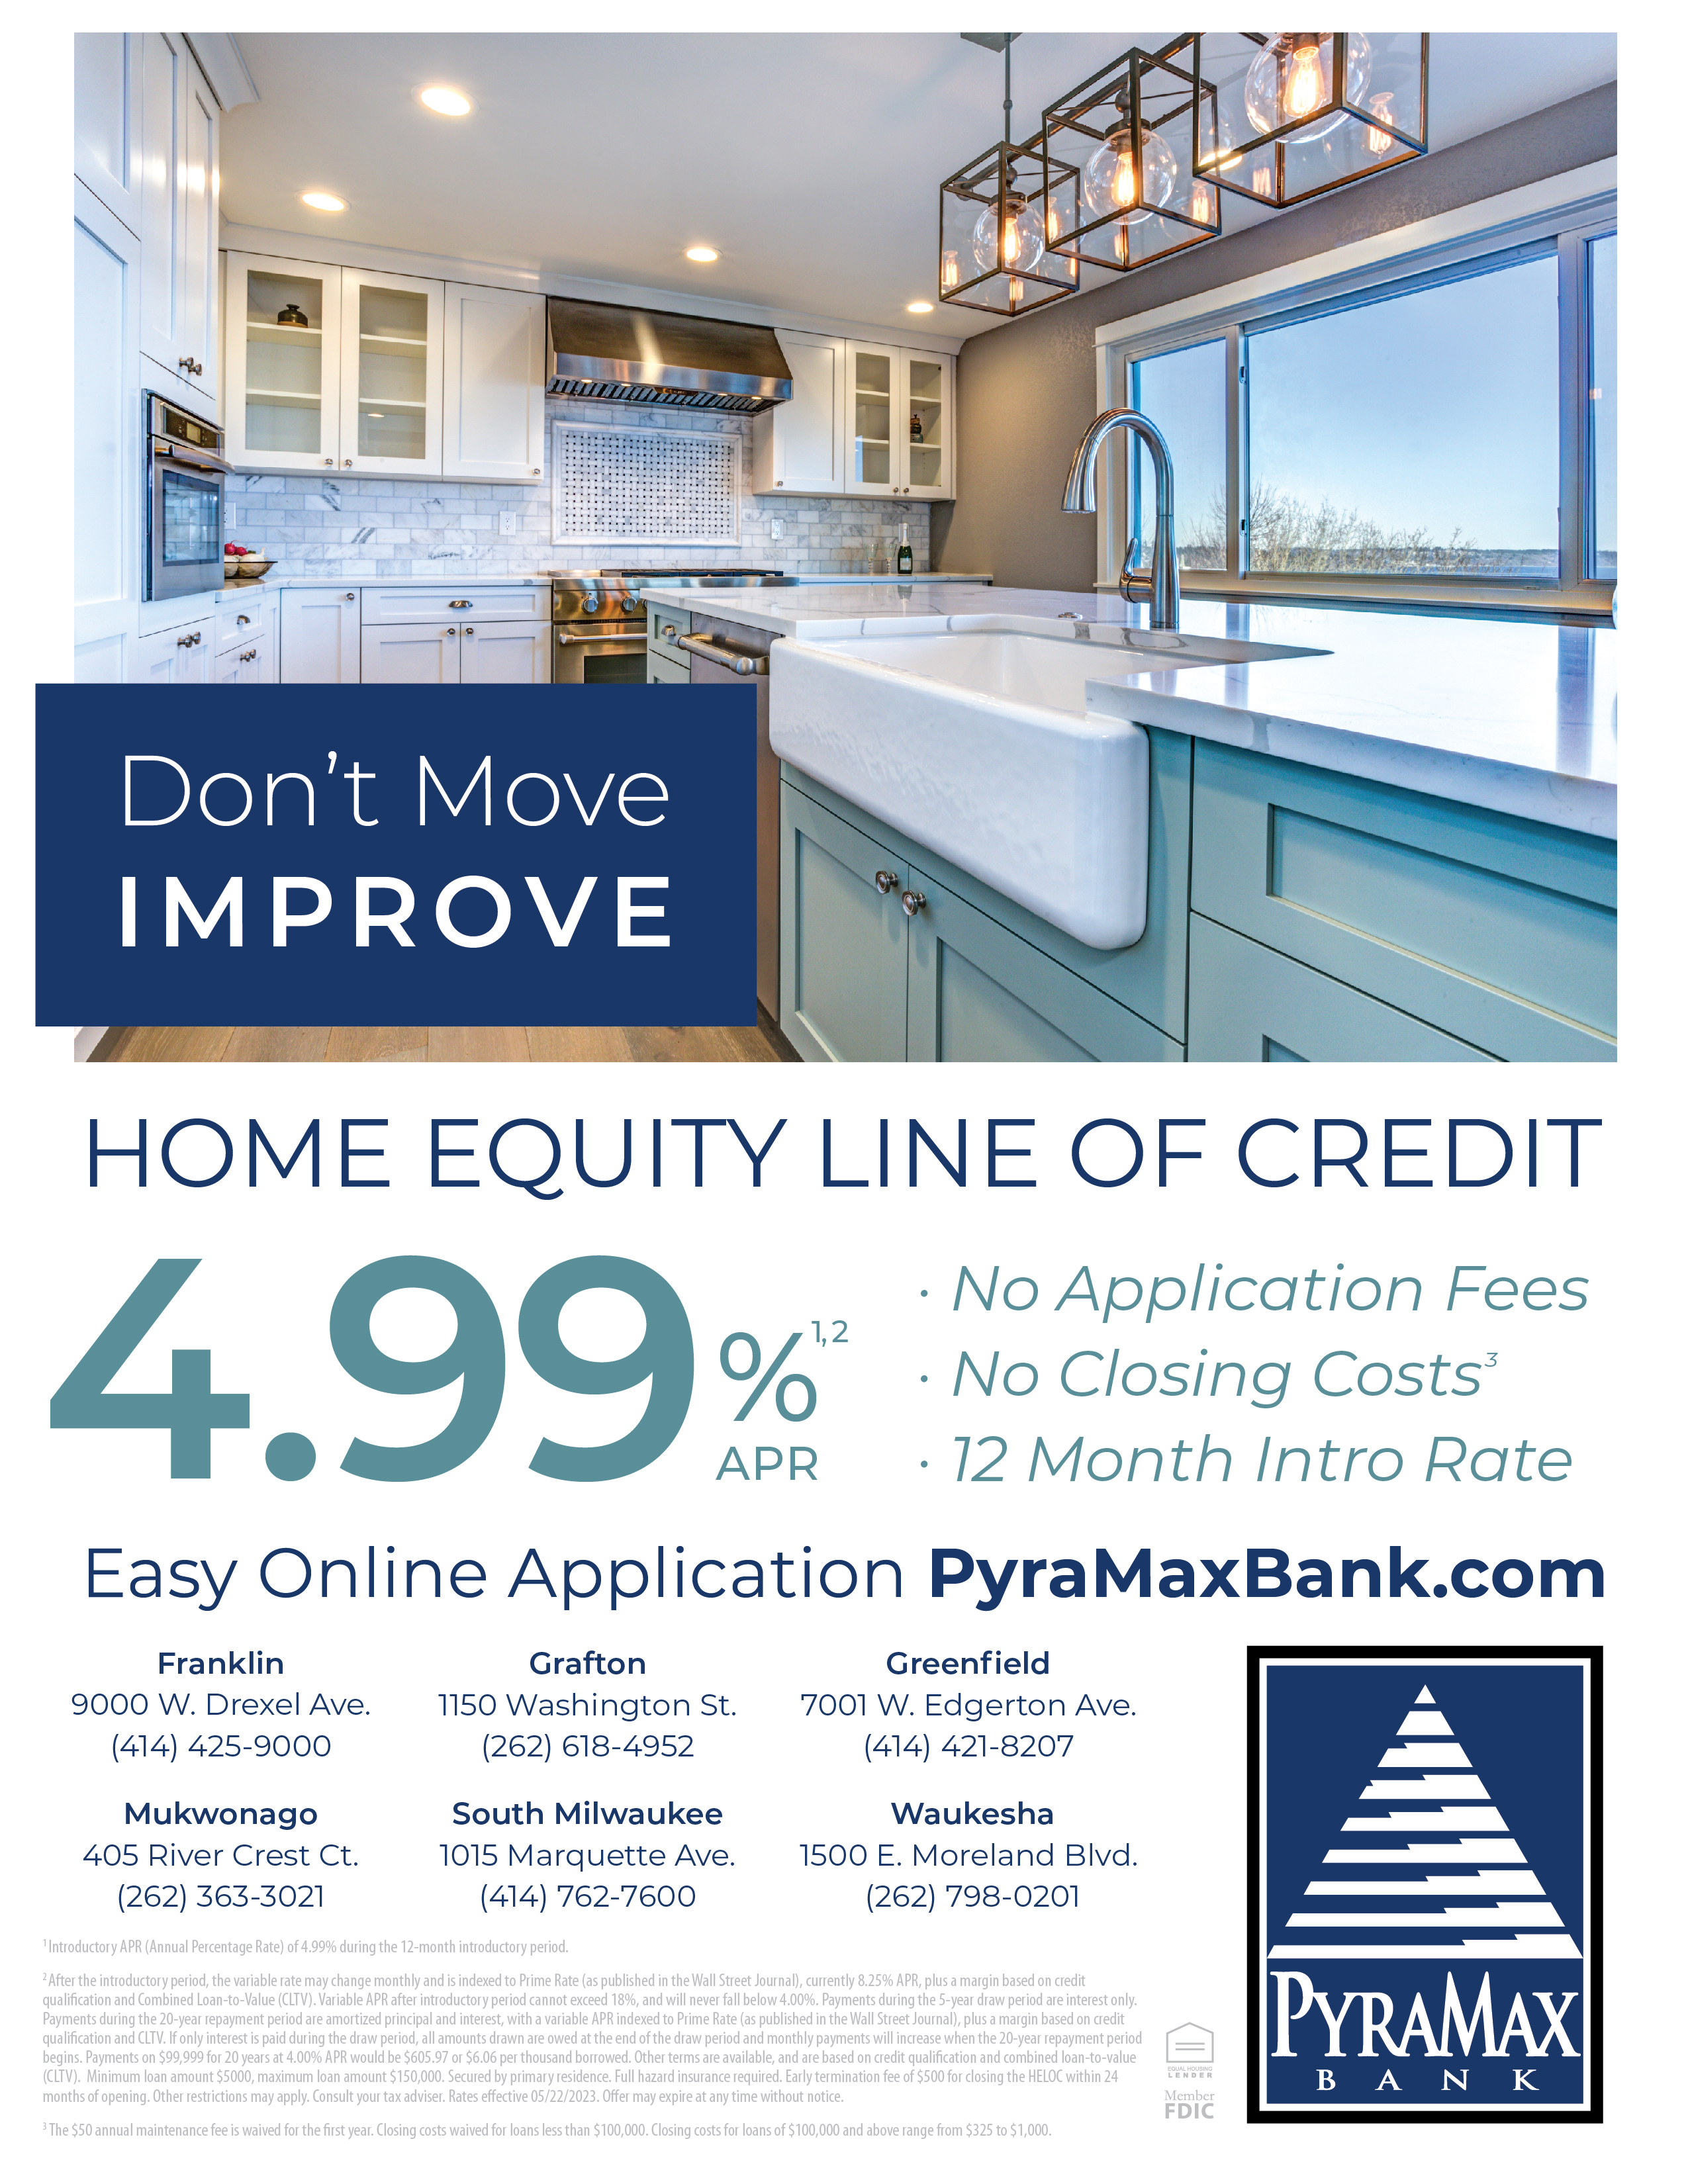 Don't move, Improve. Home Equity line of Credit 4.99% apr